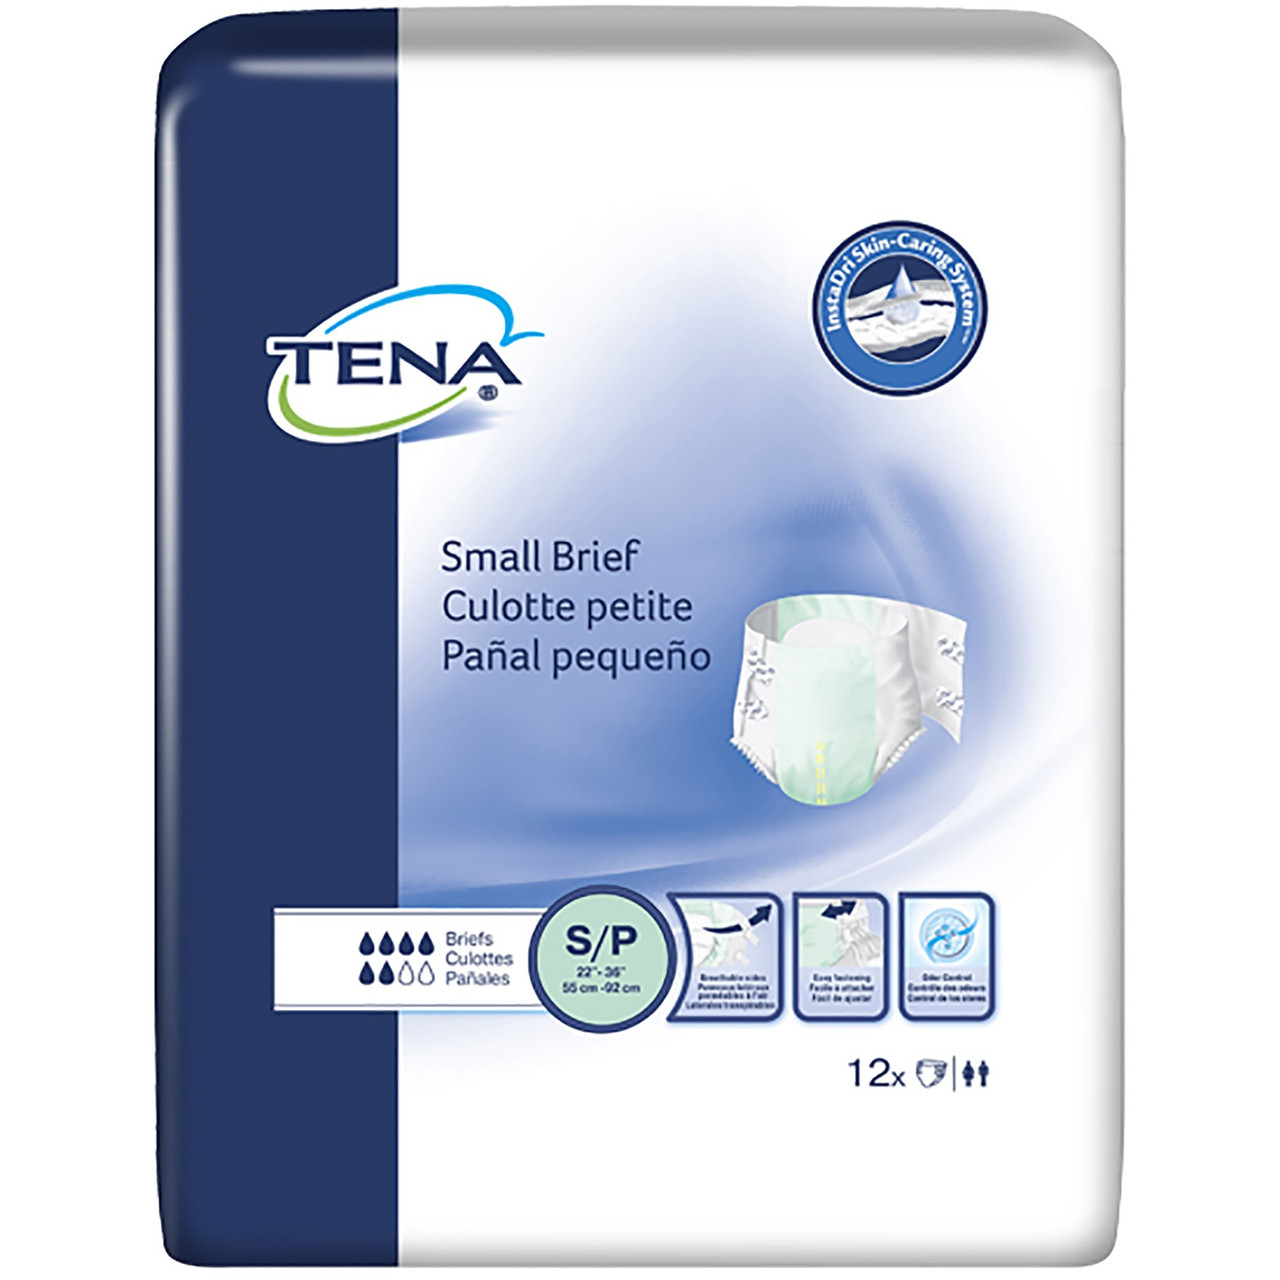 TENA Small Incontinence Briefs, Moderate to Heavy Absorbency